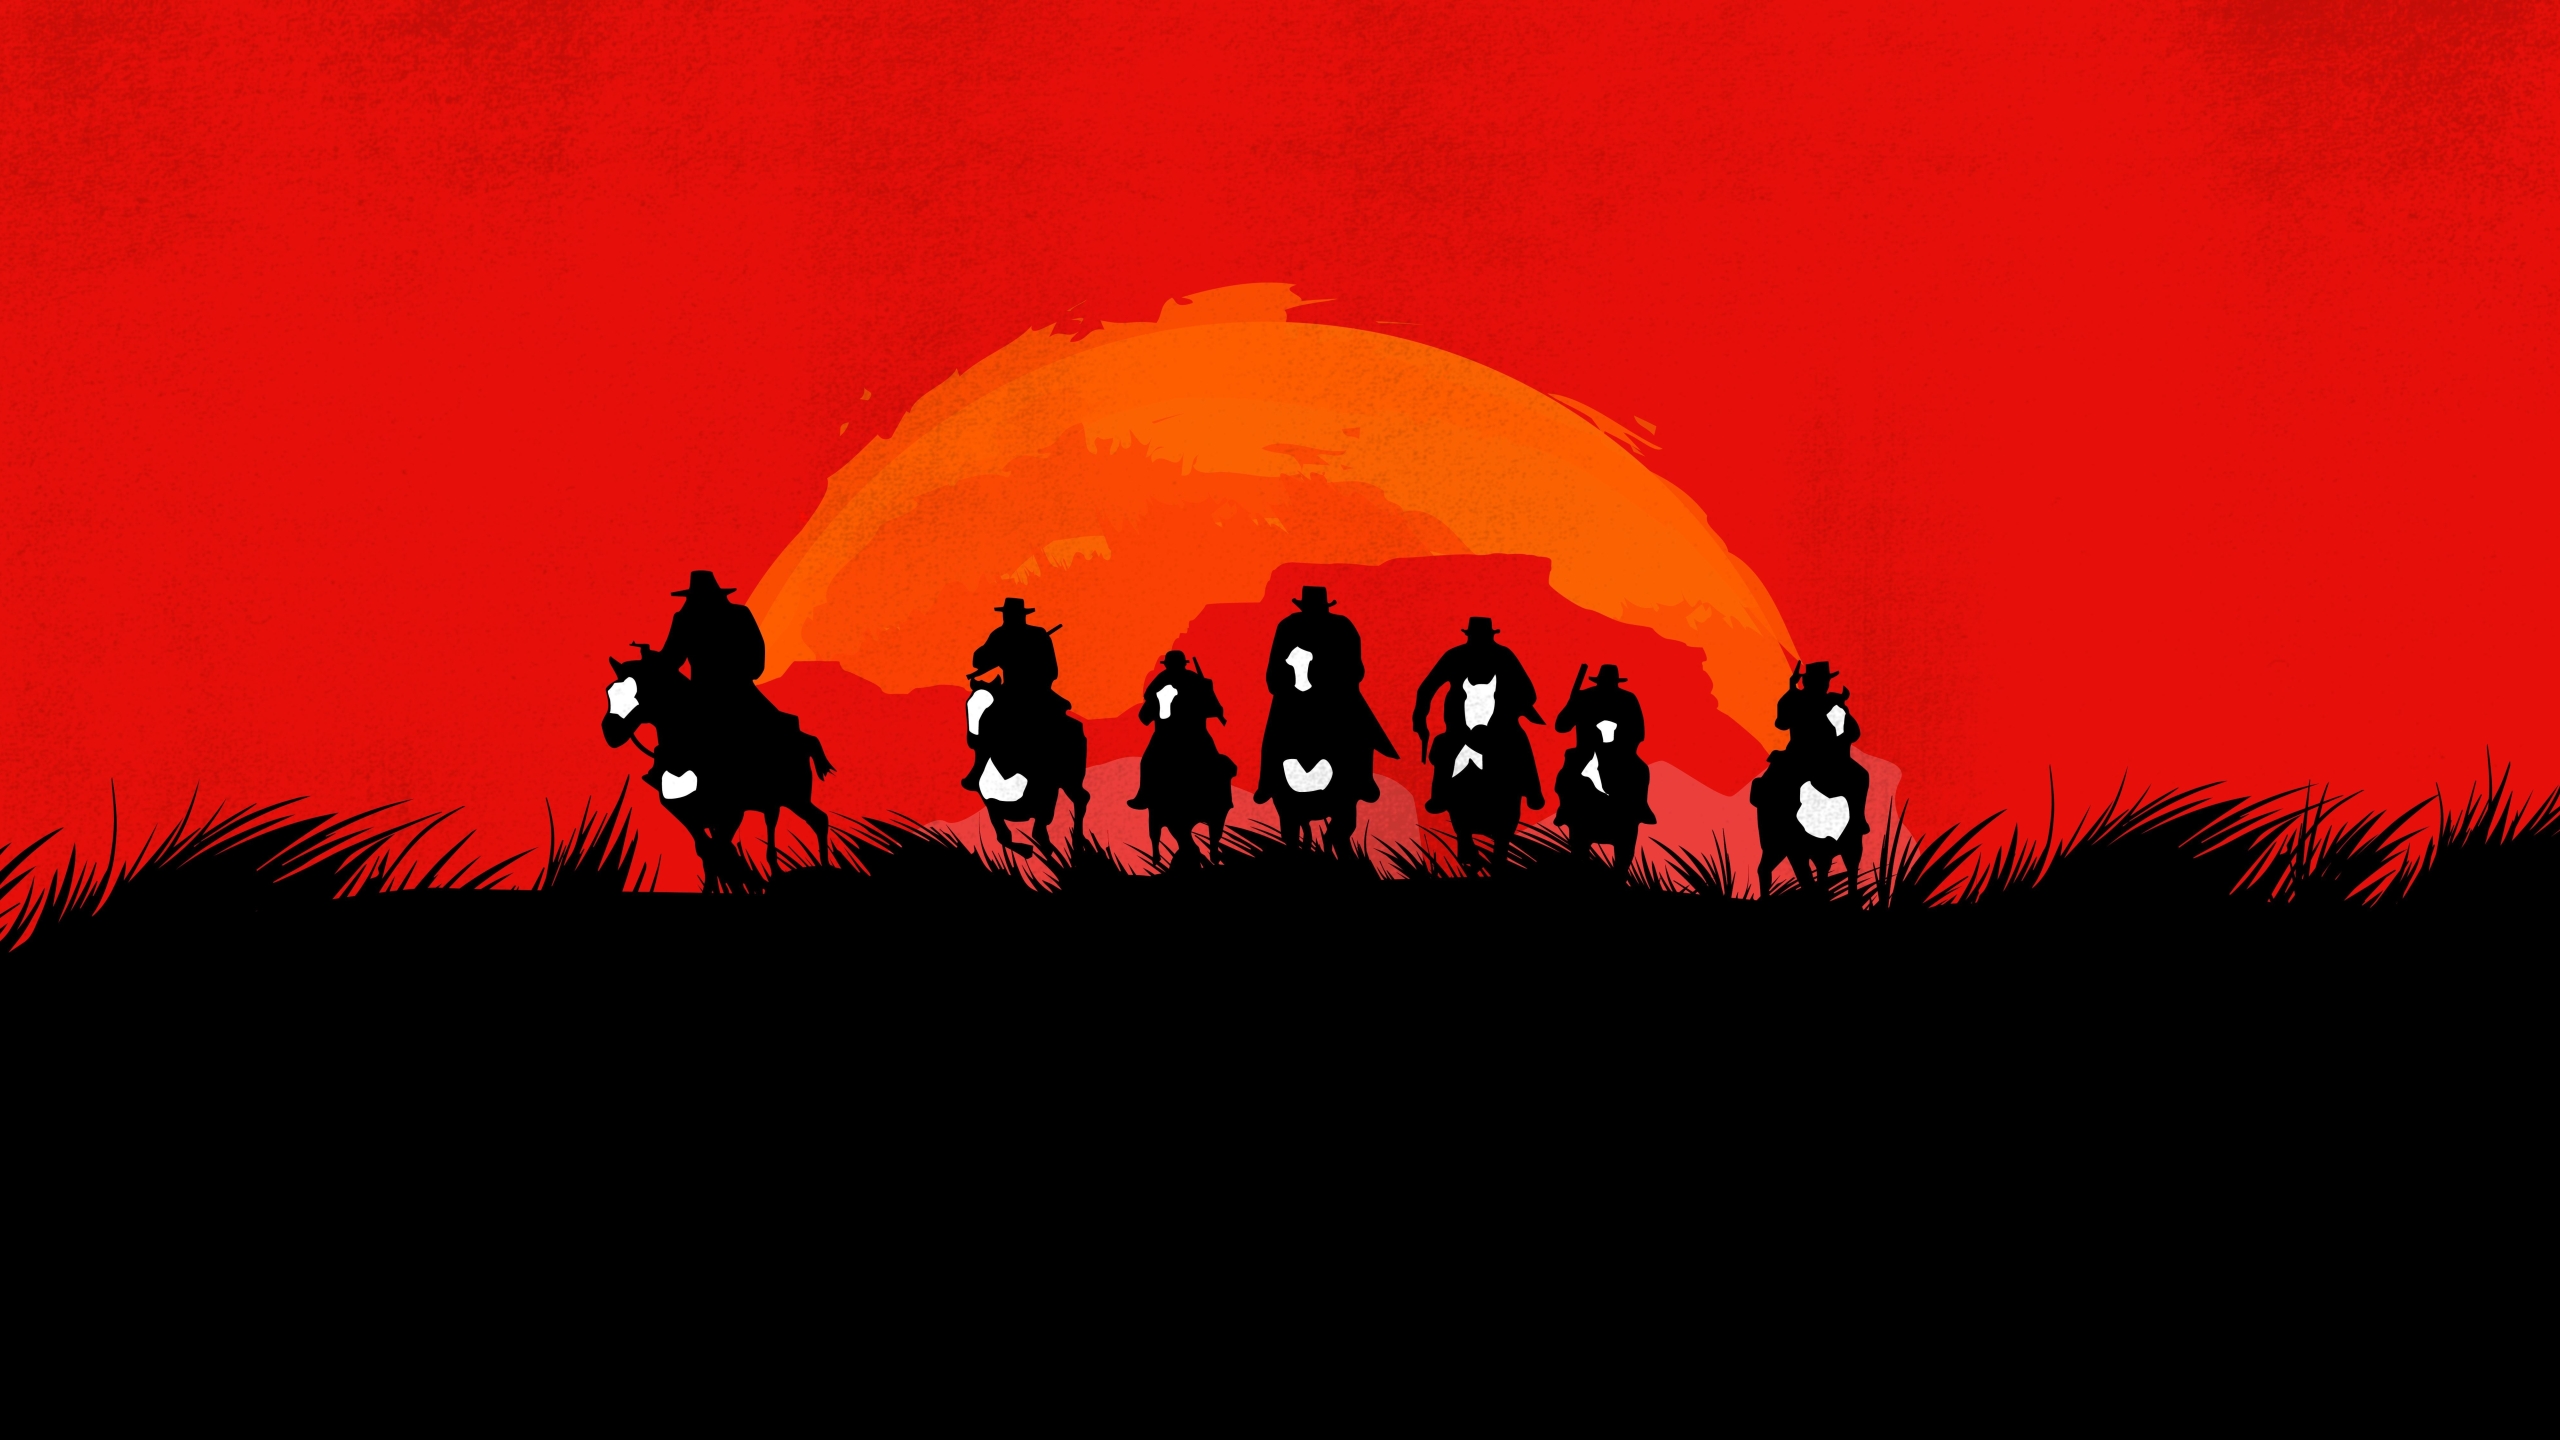 red dead redemption 2 pc free download full game